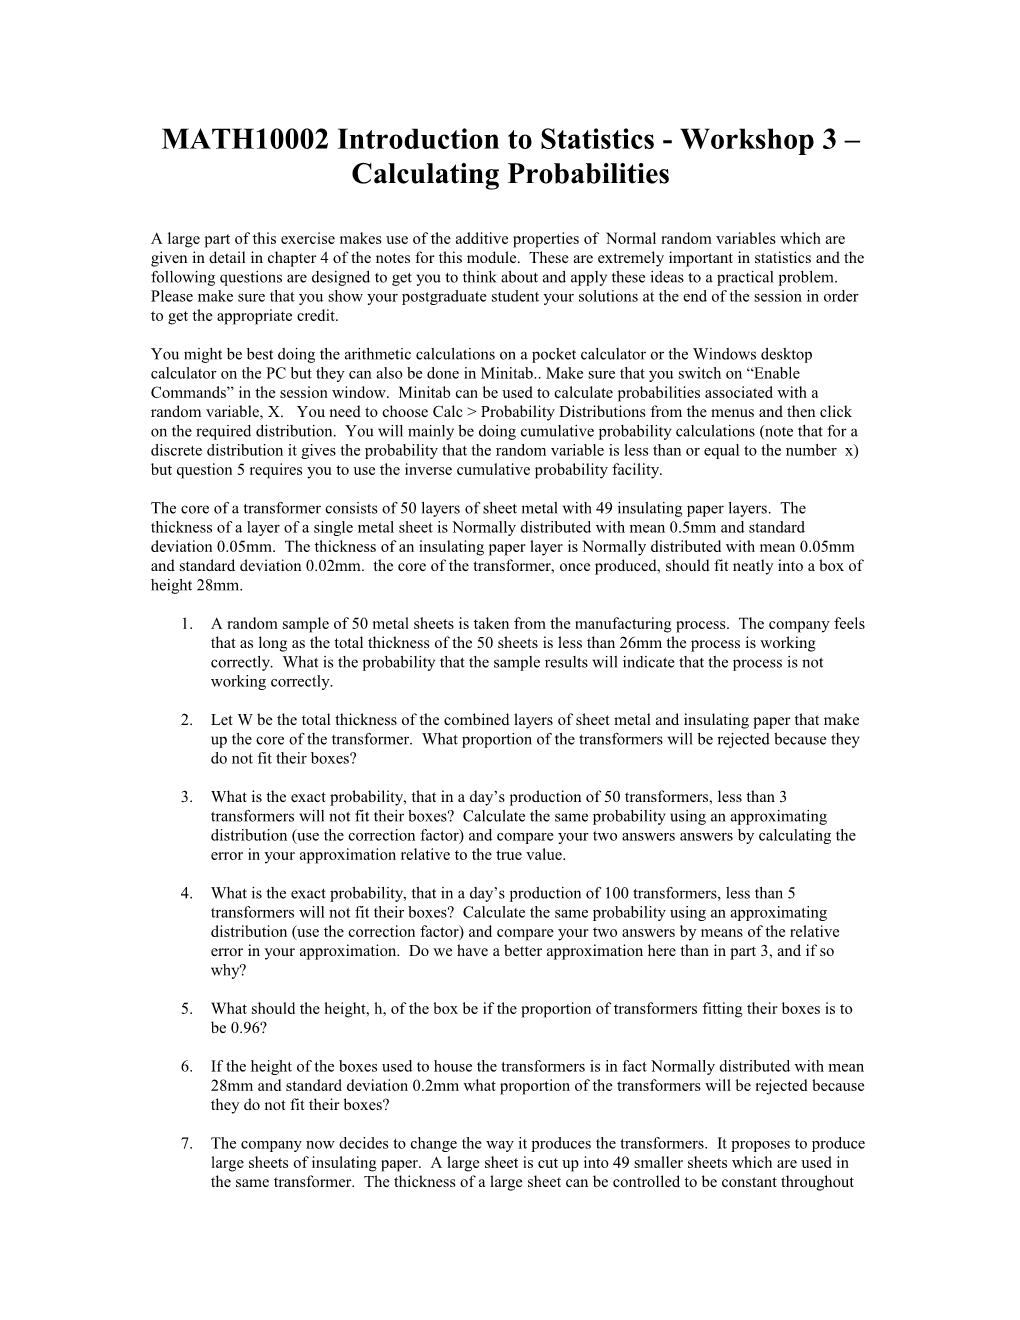 MATH10002 Introduction to Statistics - Workshop 3 Calculating Probabilities